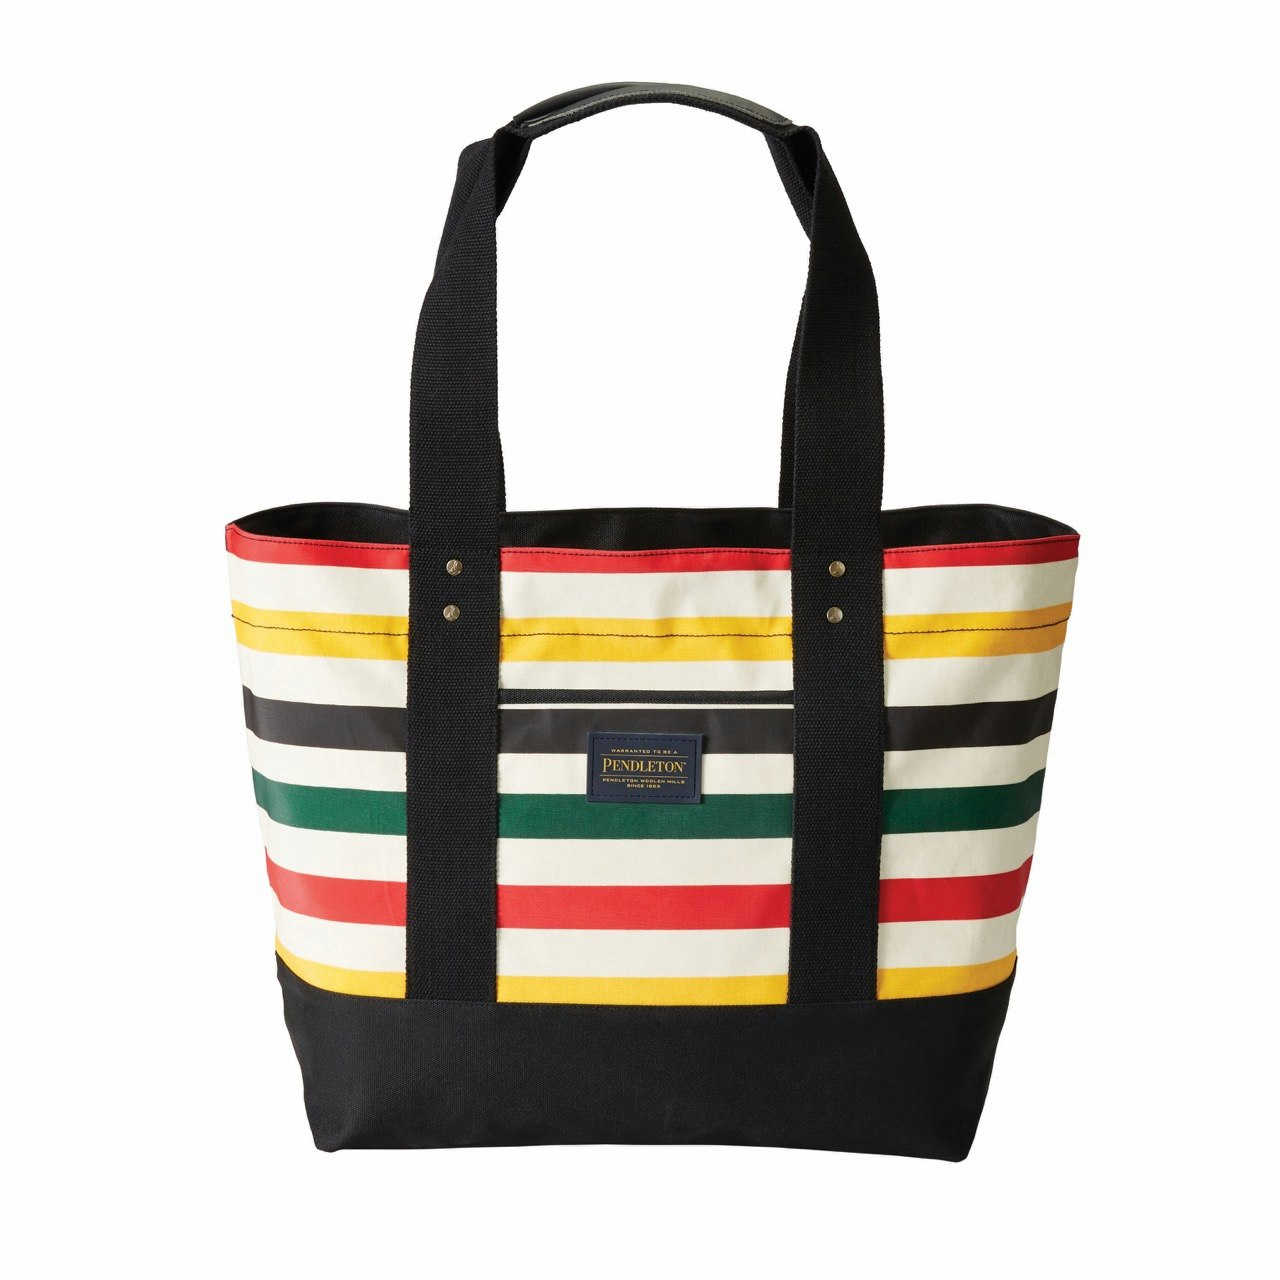 Pendleton's Glacier Canopy canvas tote with red, green, white, and yellow stripes, black handles, and black bottom